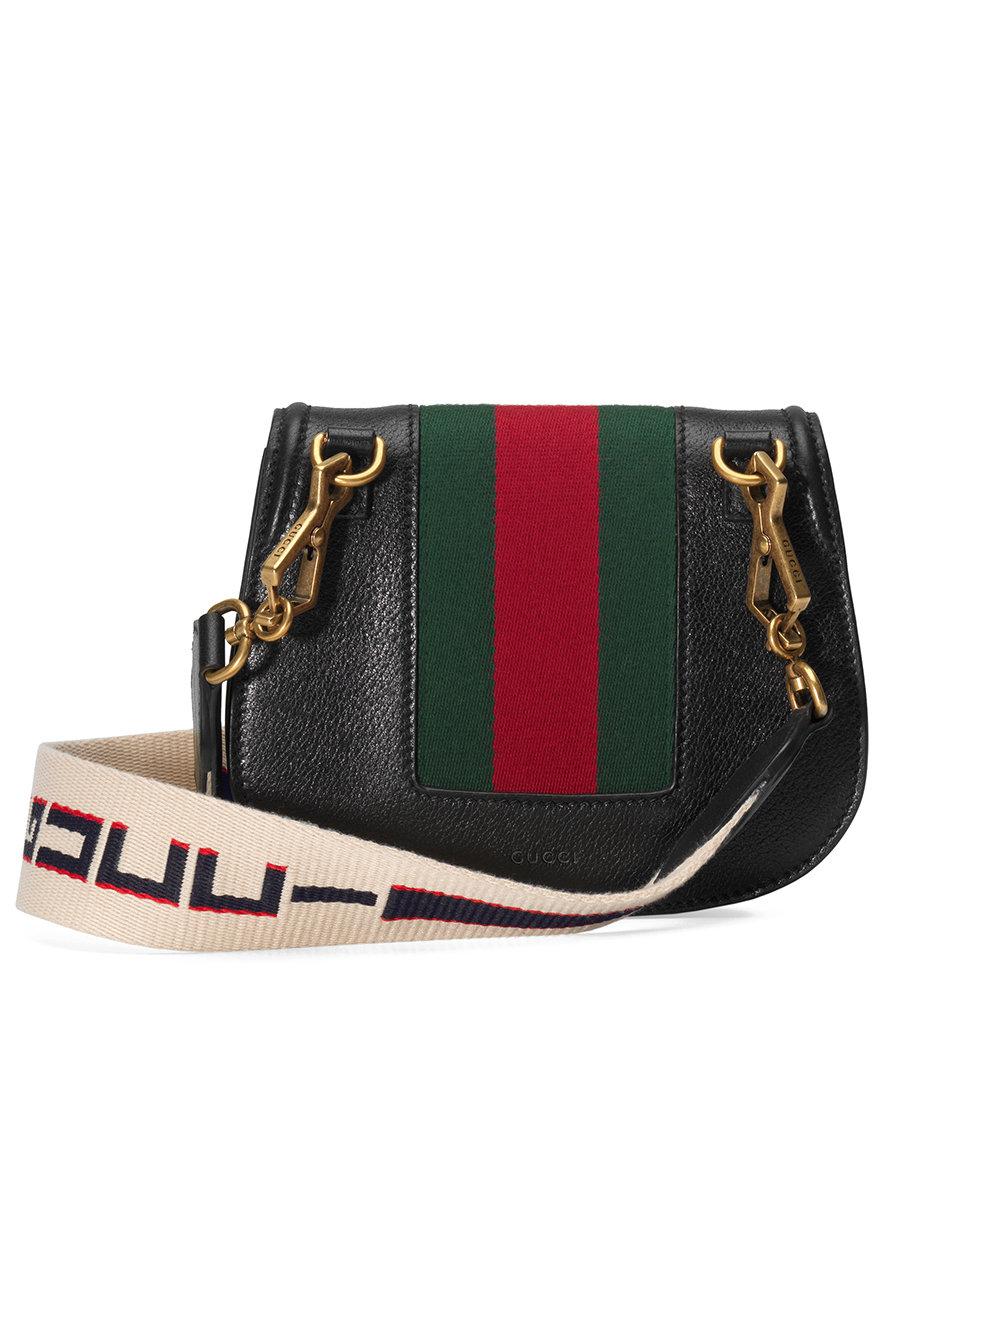 Gucci Leather Totem Small Shoulder Bag in Black - Lyst